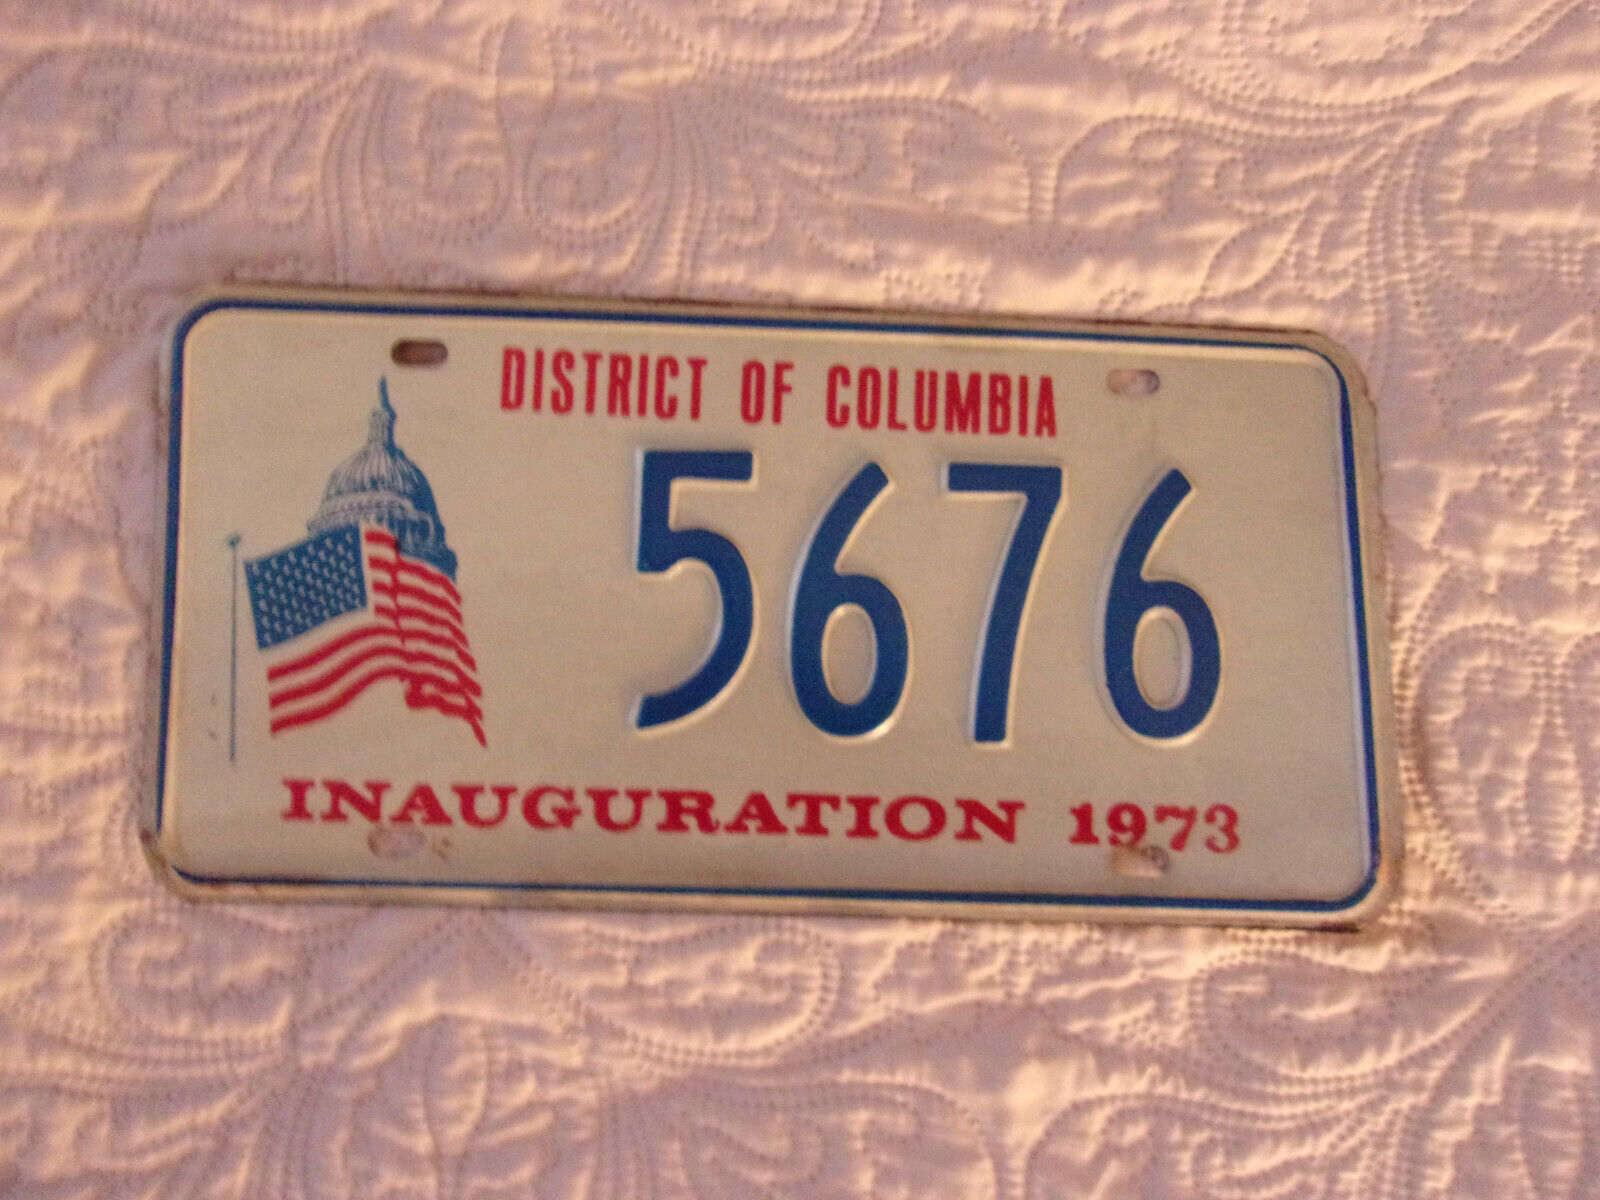 Vintage NEAR MINT 1973 DISTRICT OF COLUMBIA Commemorative Inauguration Lic Plate